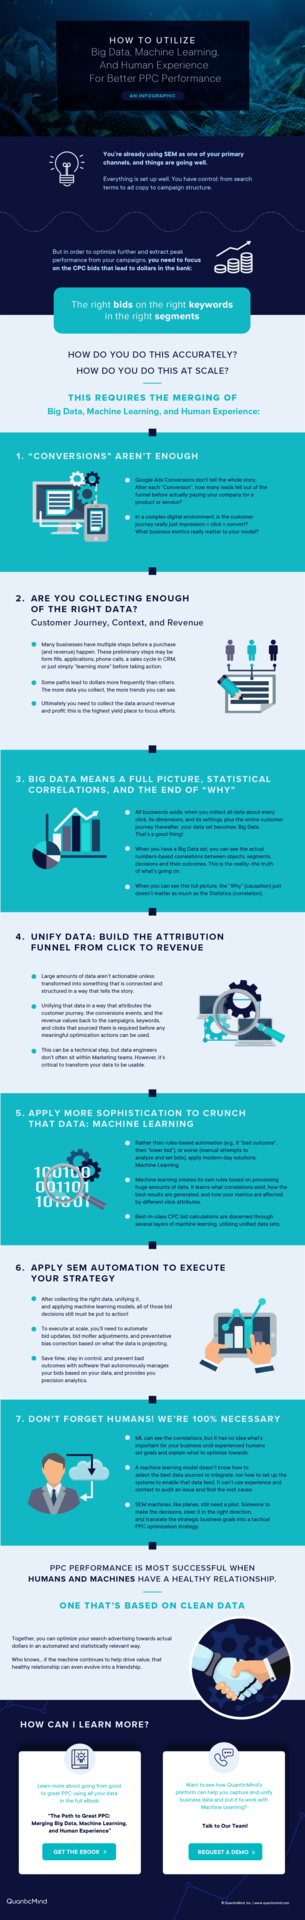 Learn how to Optimize PPC with Big Data and Machine Learning [An Infographic]